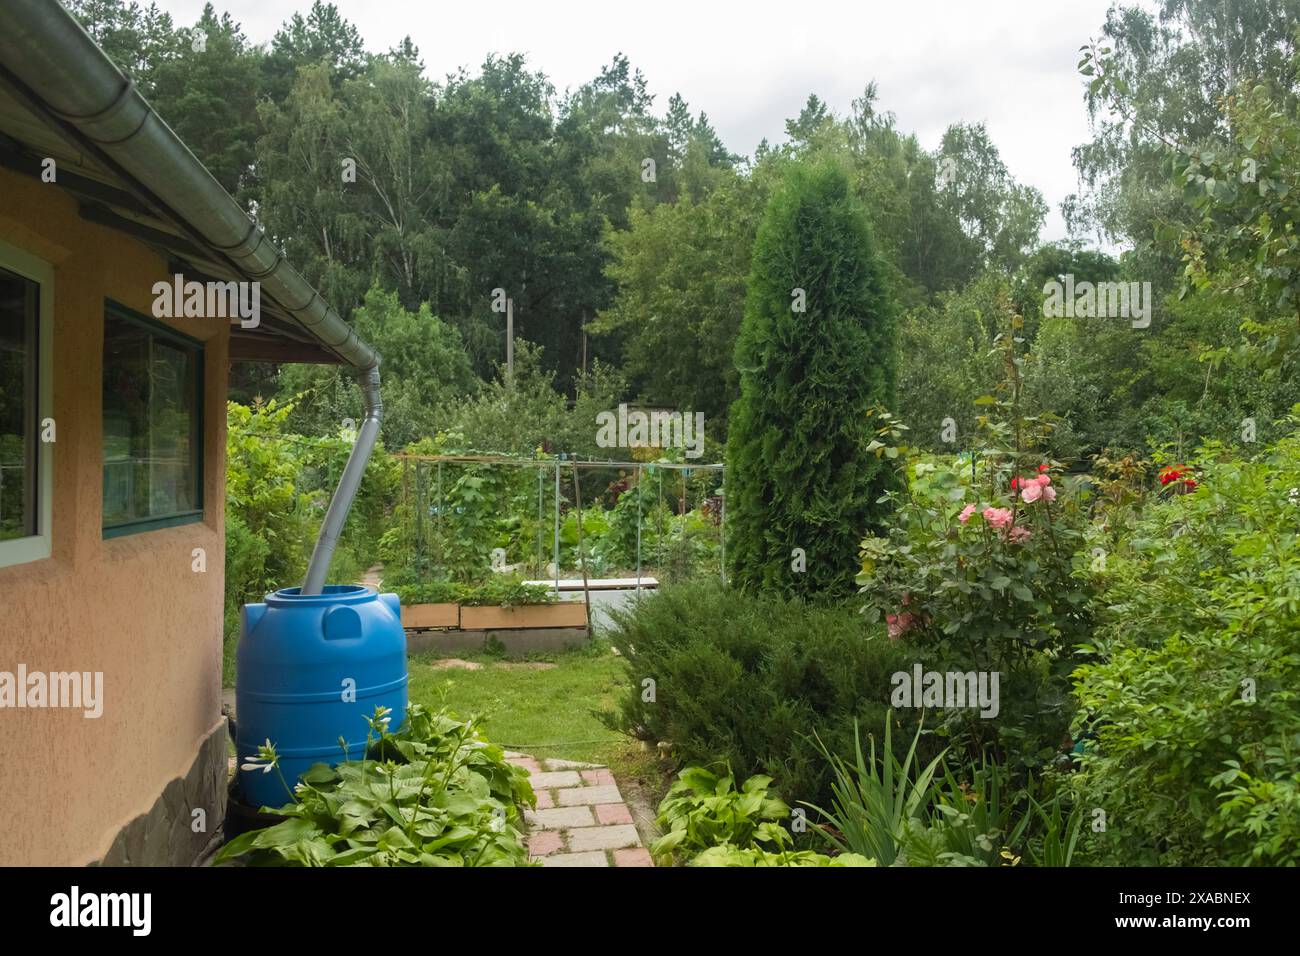 Blue rainwater barrel connected to a downspout on the side of a rural house, surrounded by lush green foliage and garden path. Rain water harvesting a Stock Photo